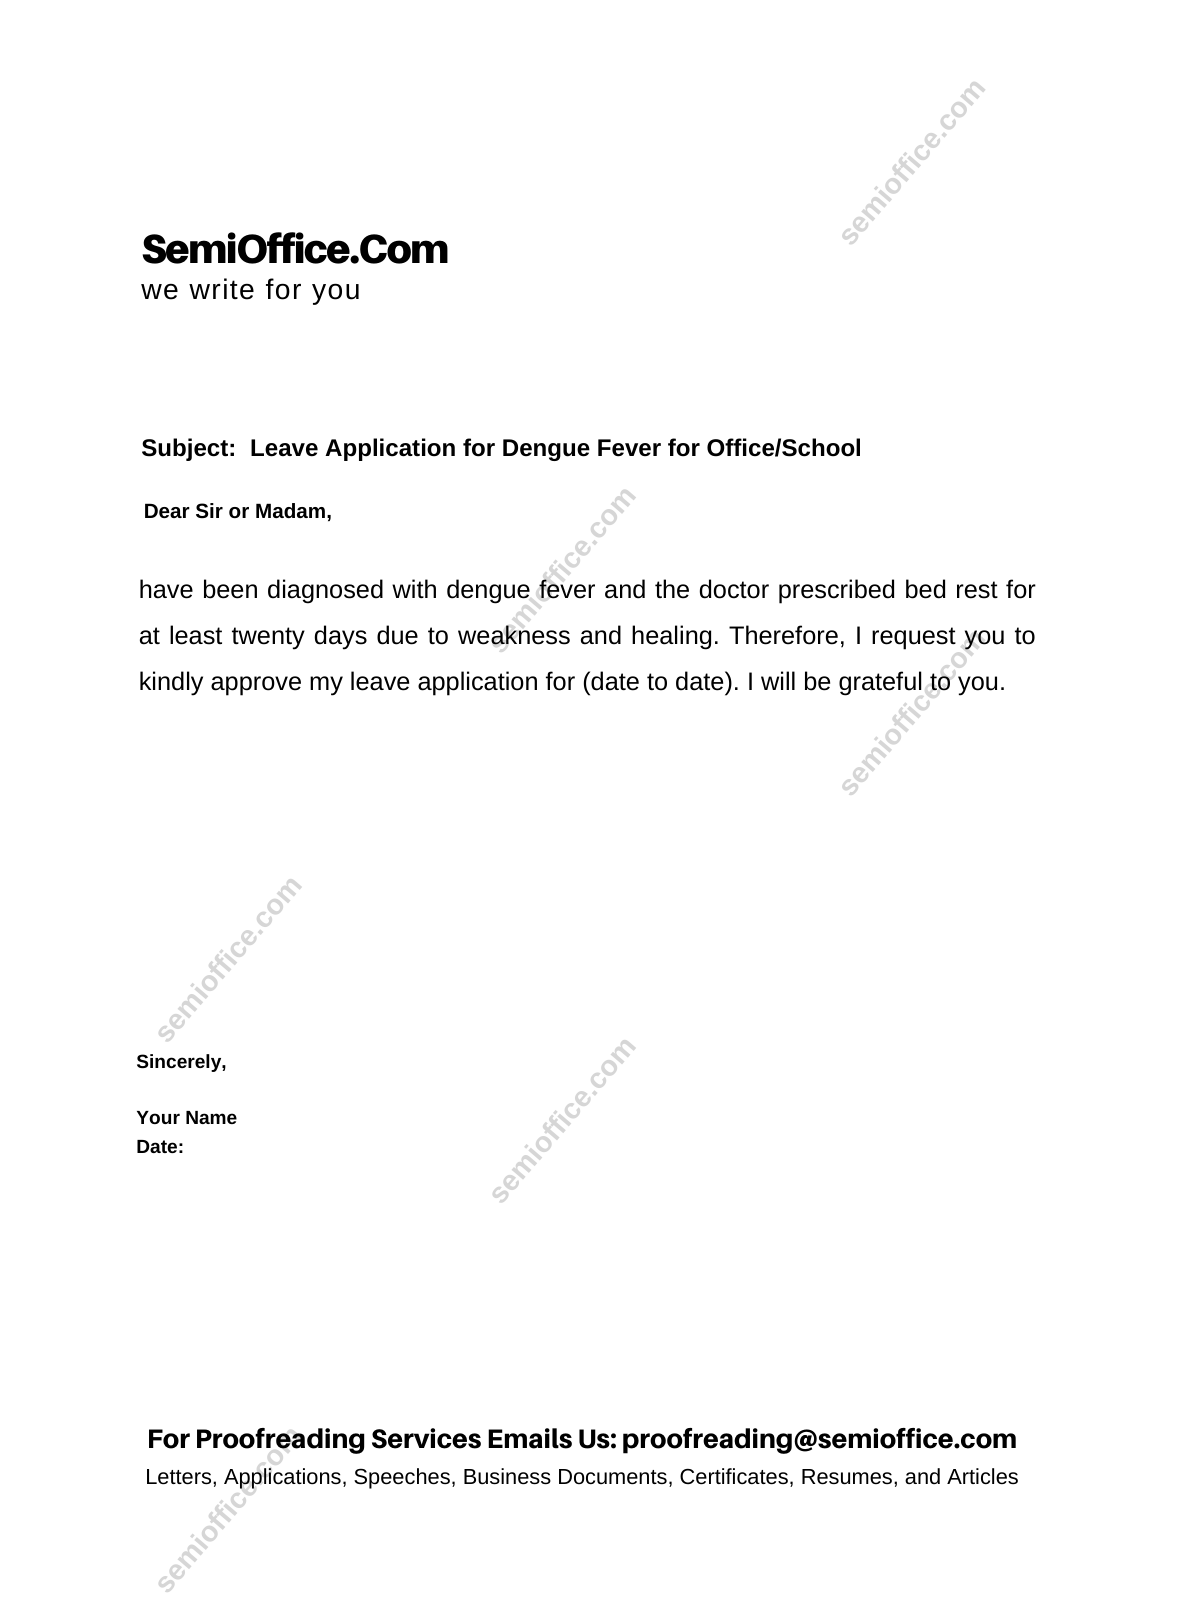 leave application letter due to fever